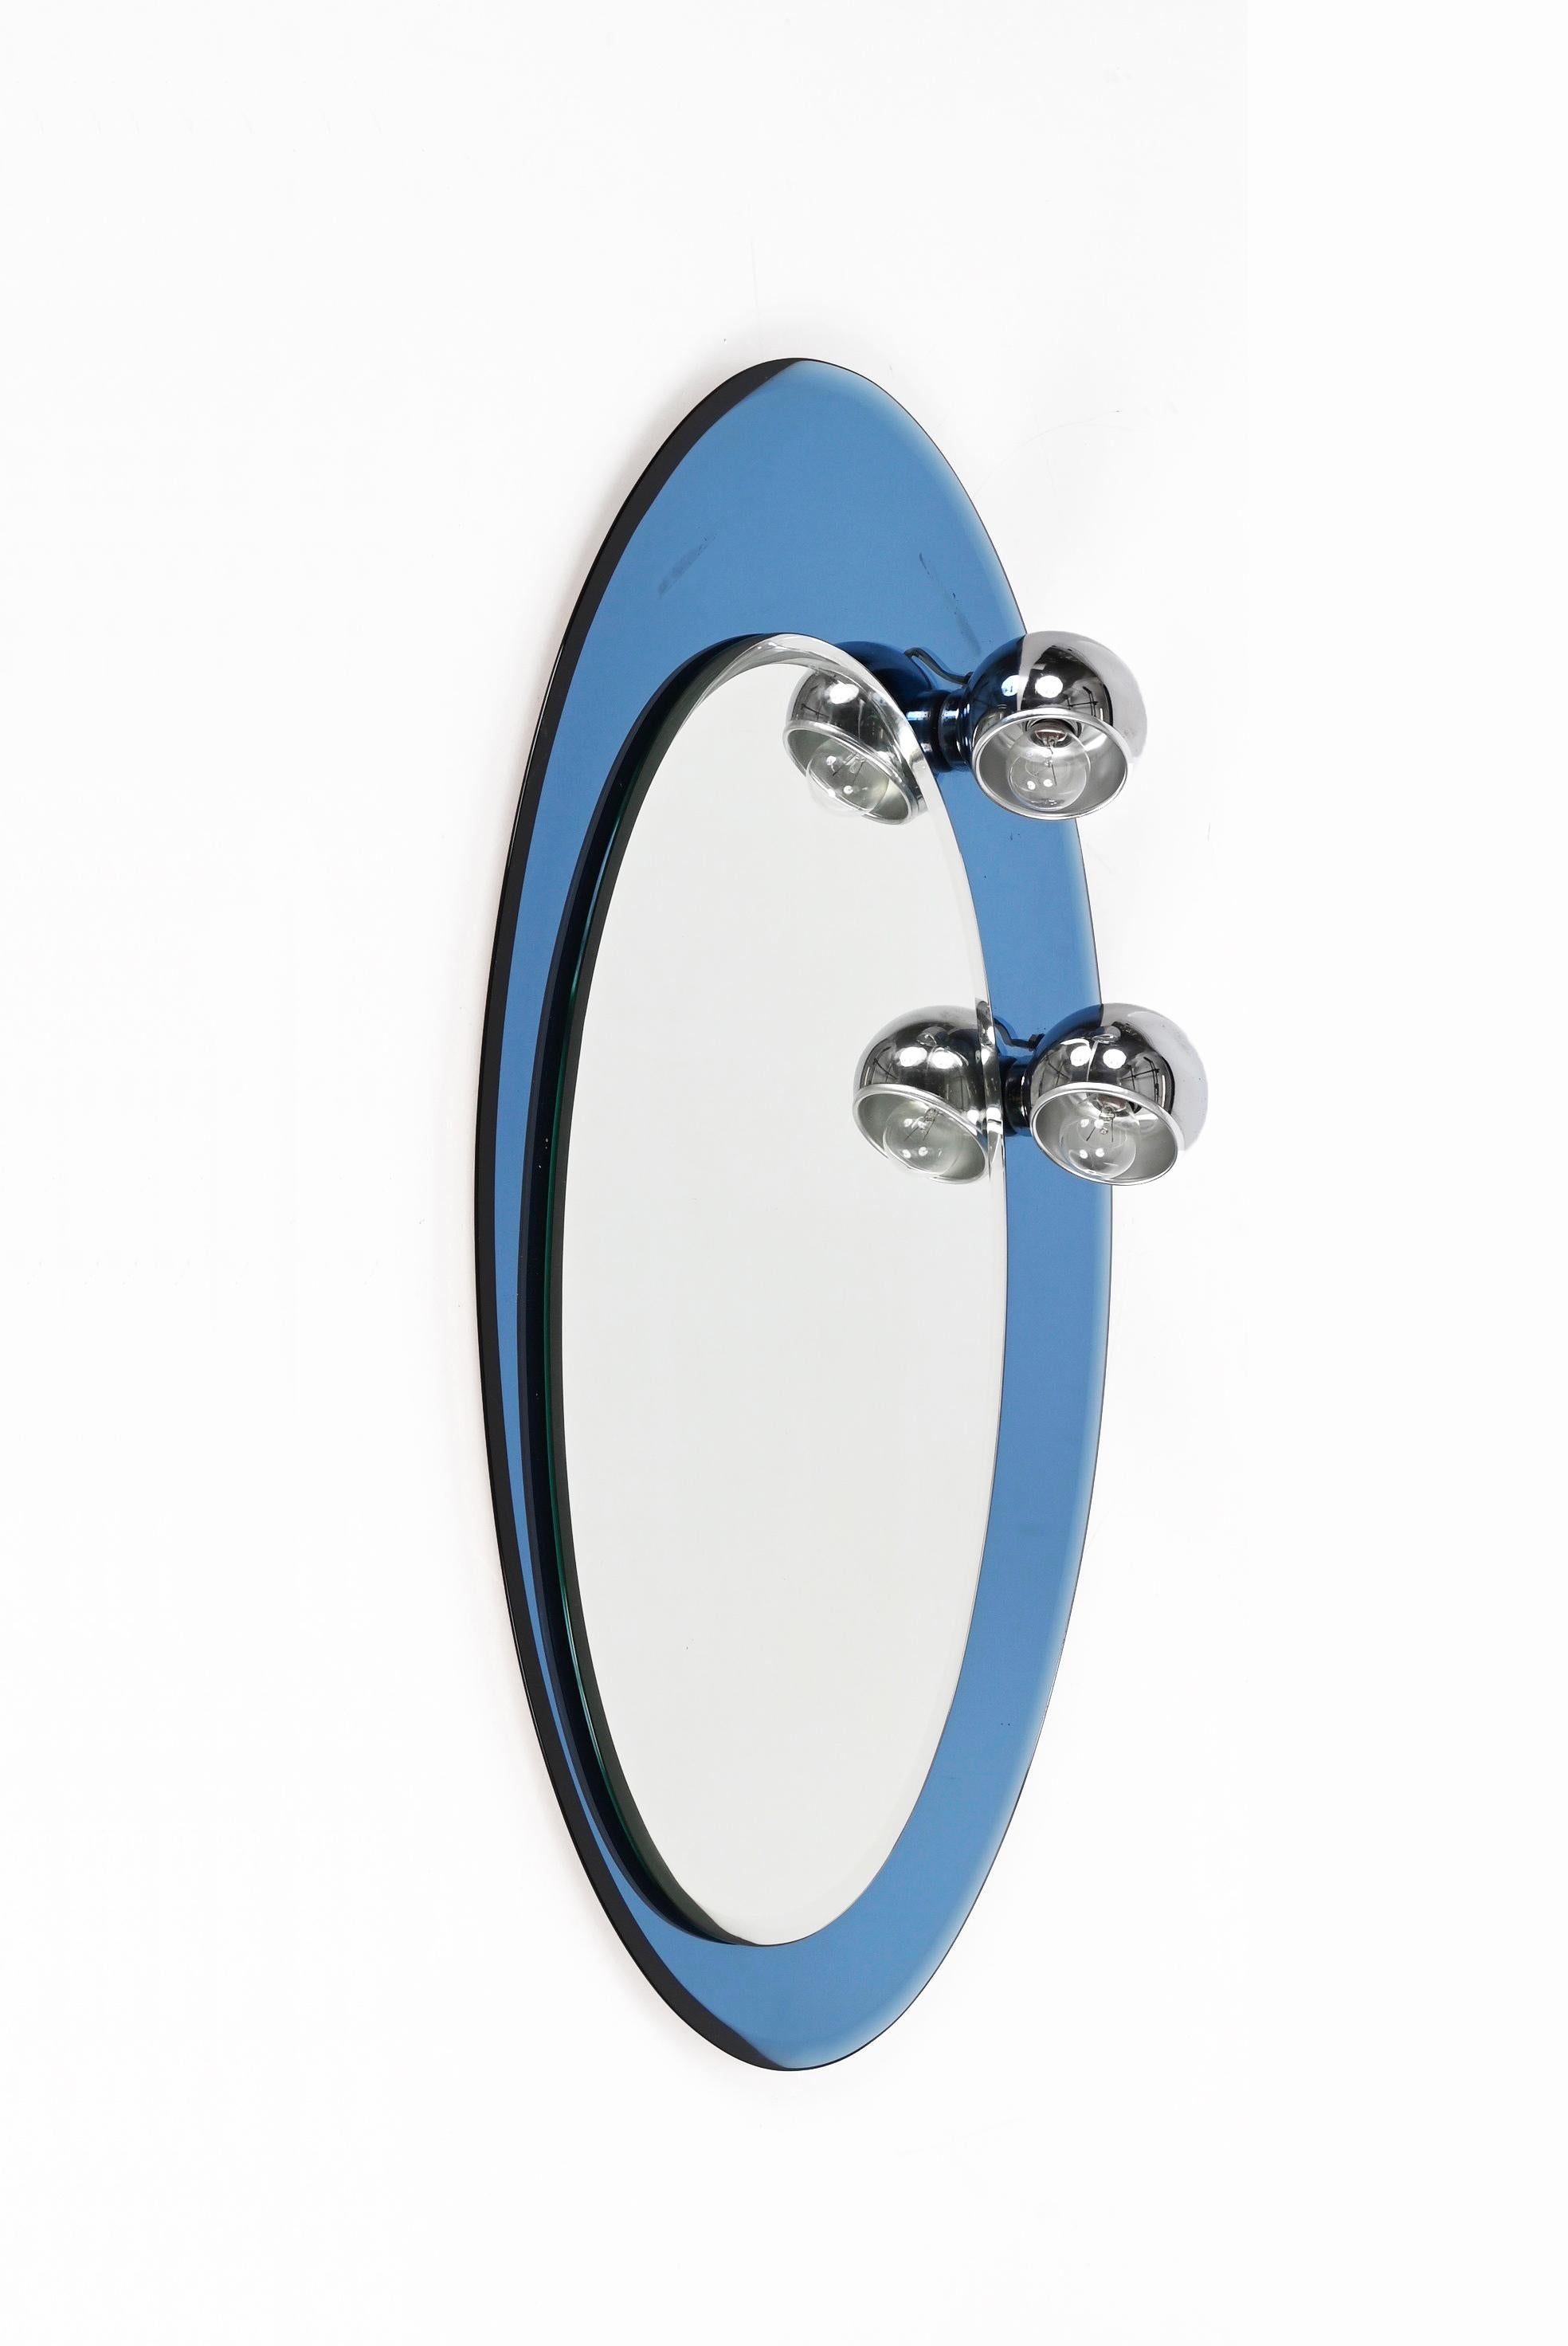 Midcentury Oval Wall Mirror with Blue Glass Frame and Magnetic Lights Italy 1960 For Sale 10